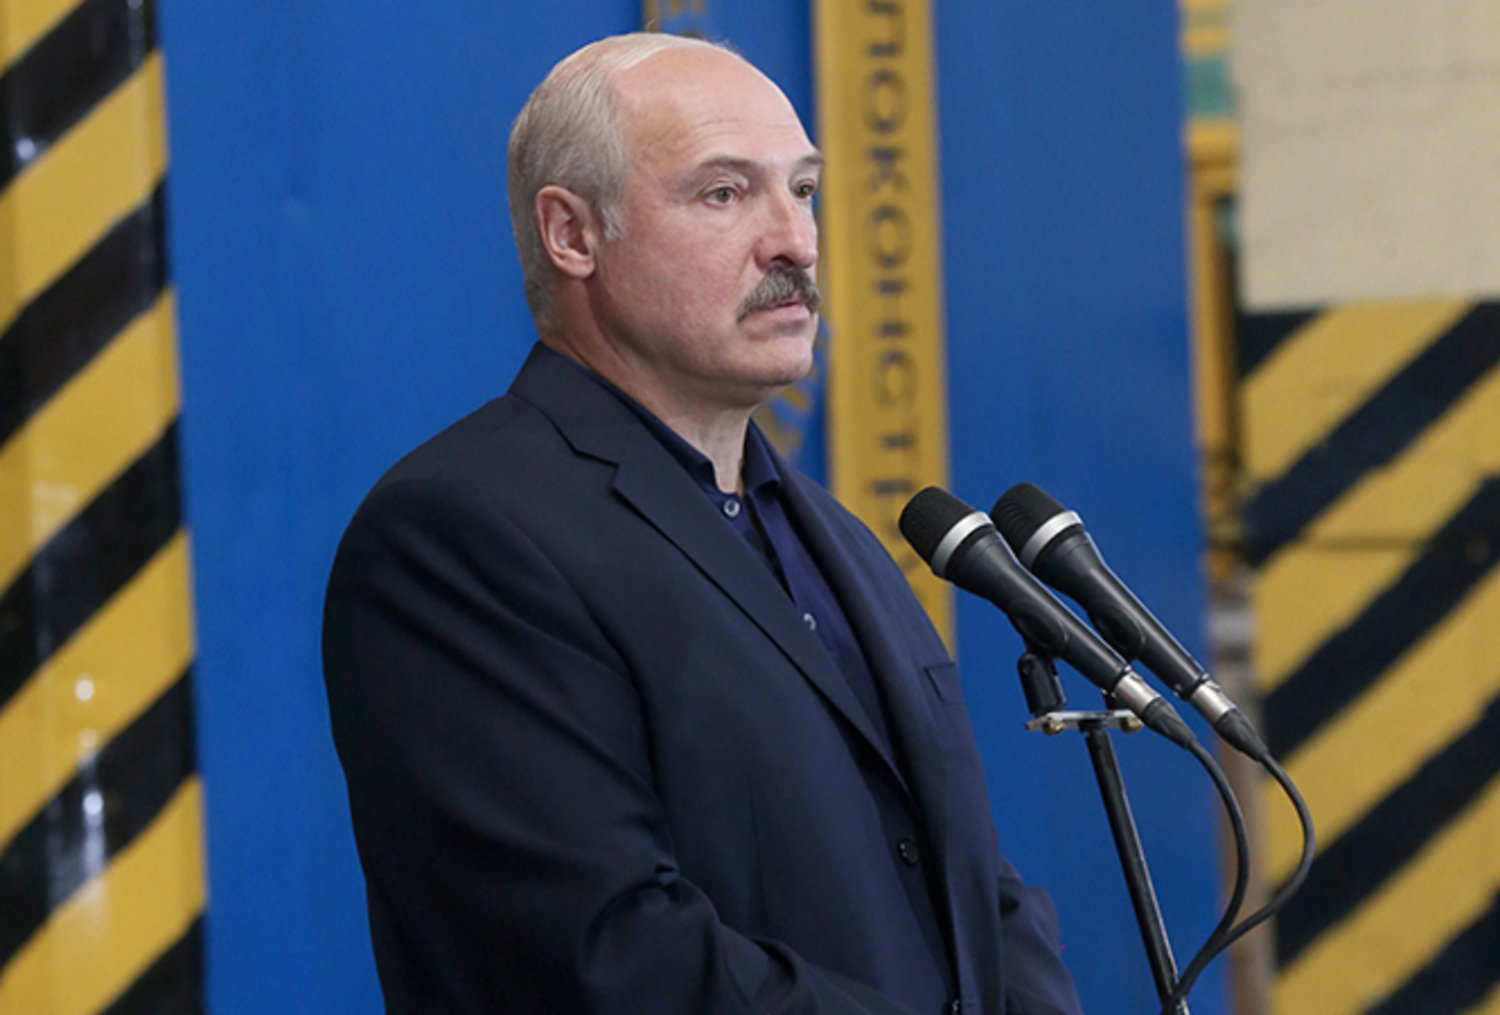 Lukashenka intervened in situation around NPP incident to relieve tension in Belarusian society